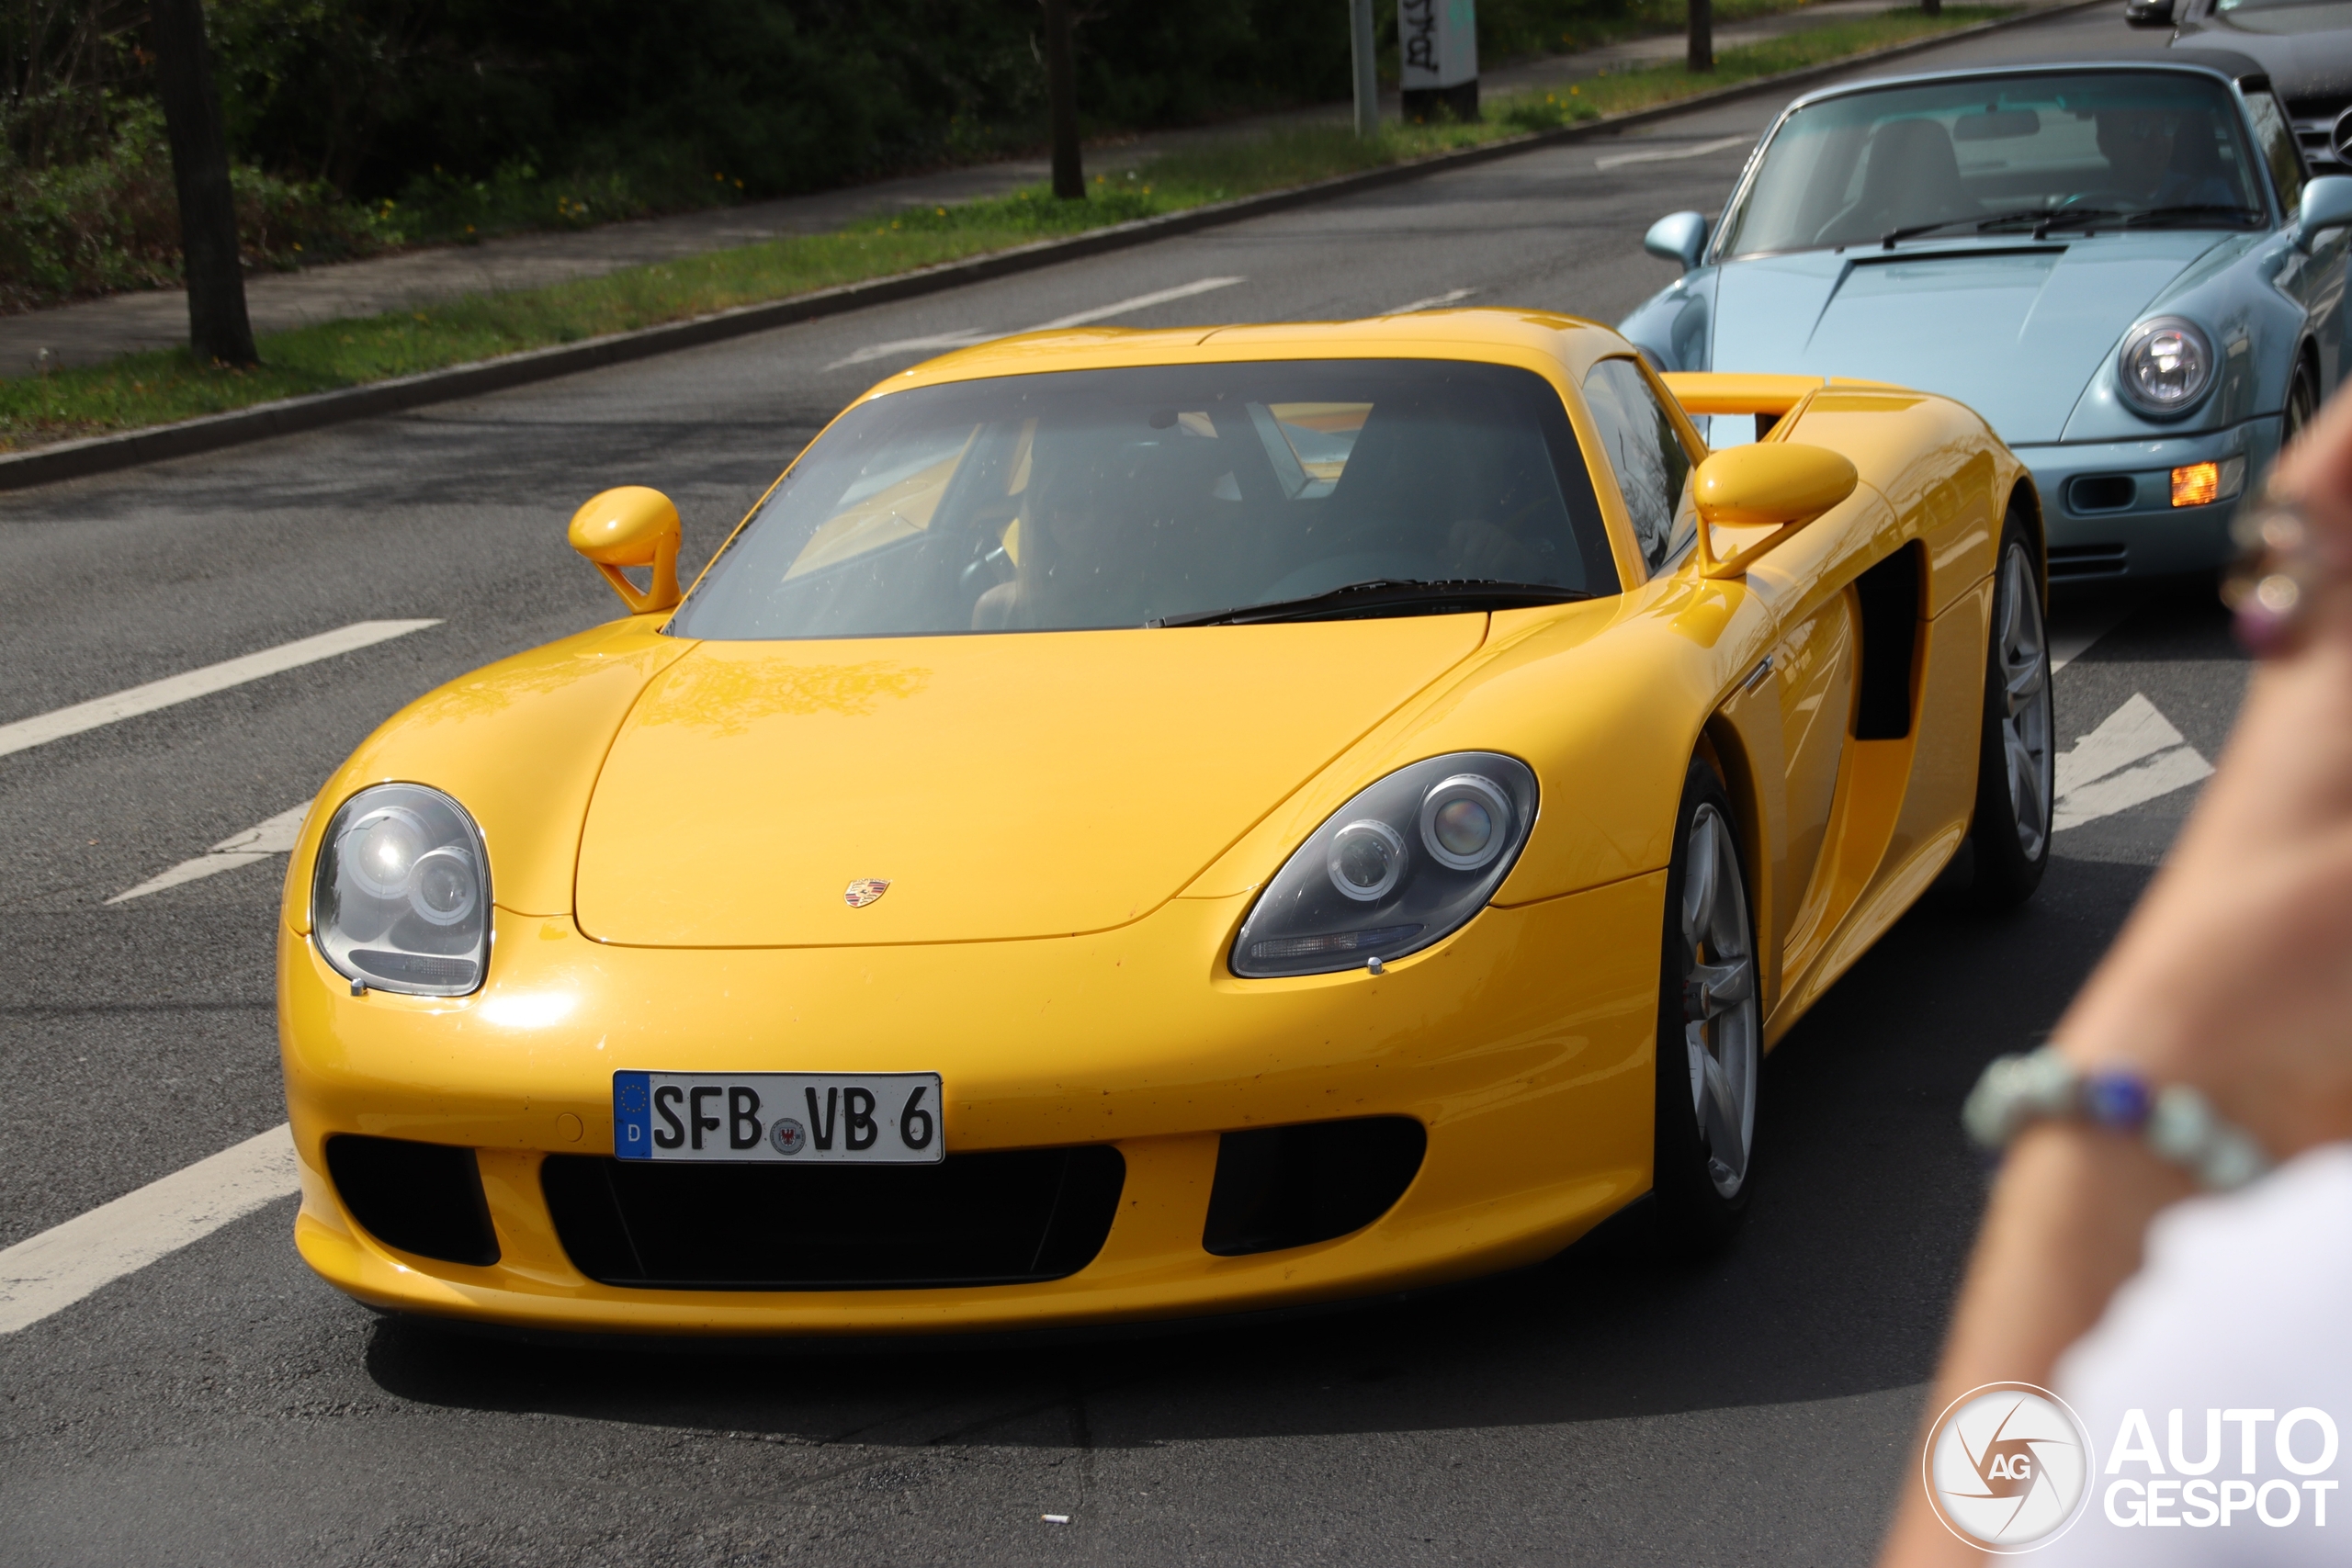 A yellow Carrera GT shows up in Dresden